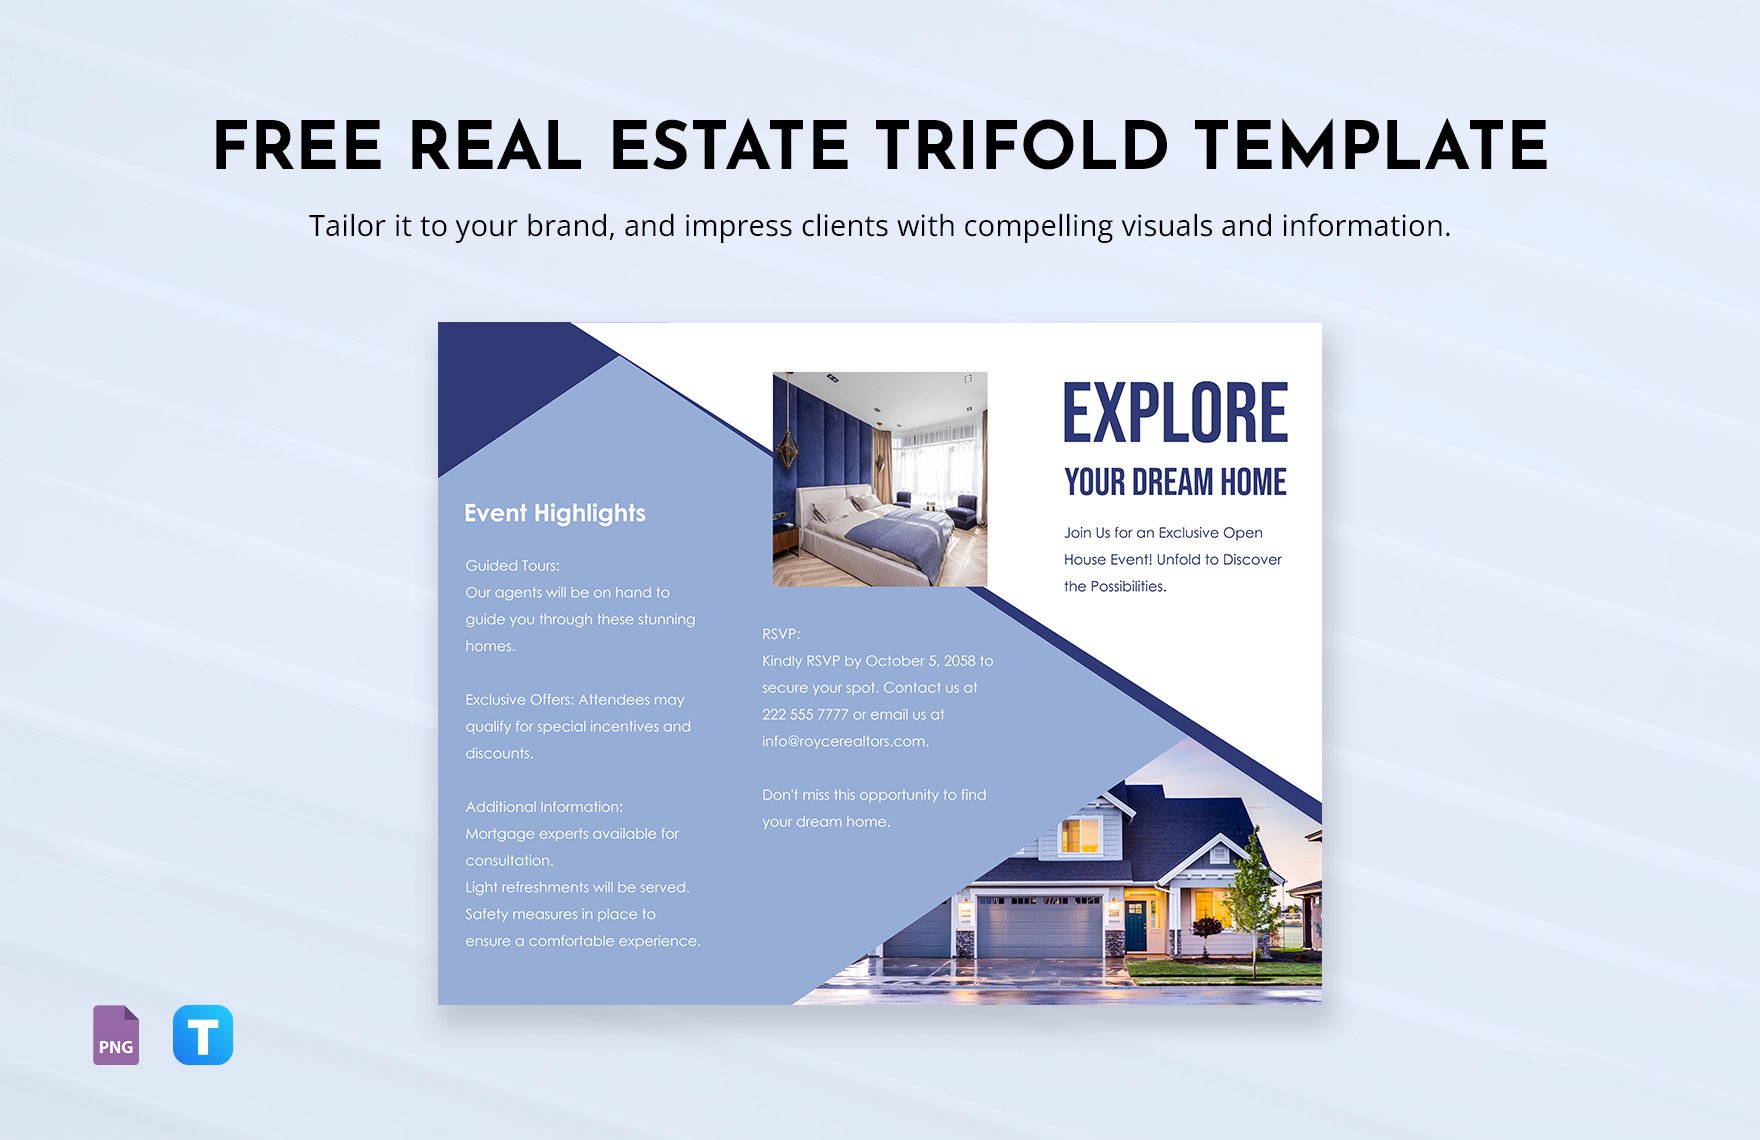 Free Real Estate Trifold Template